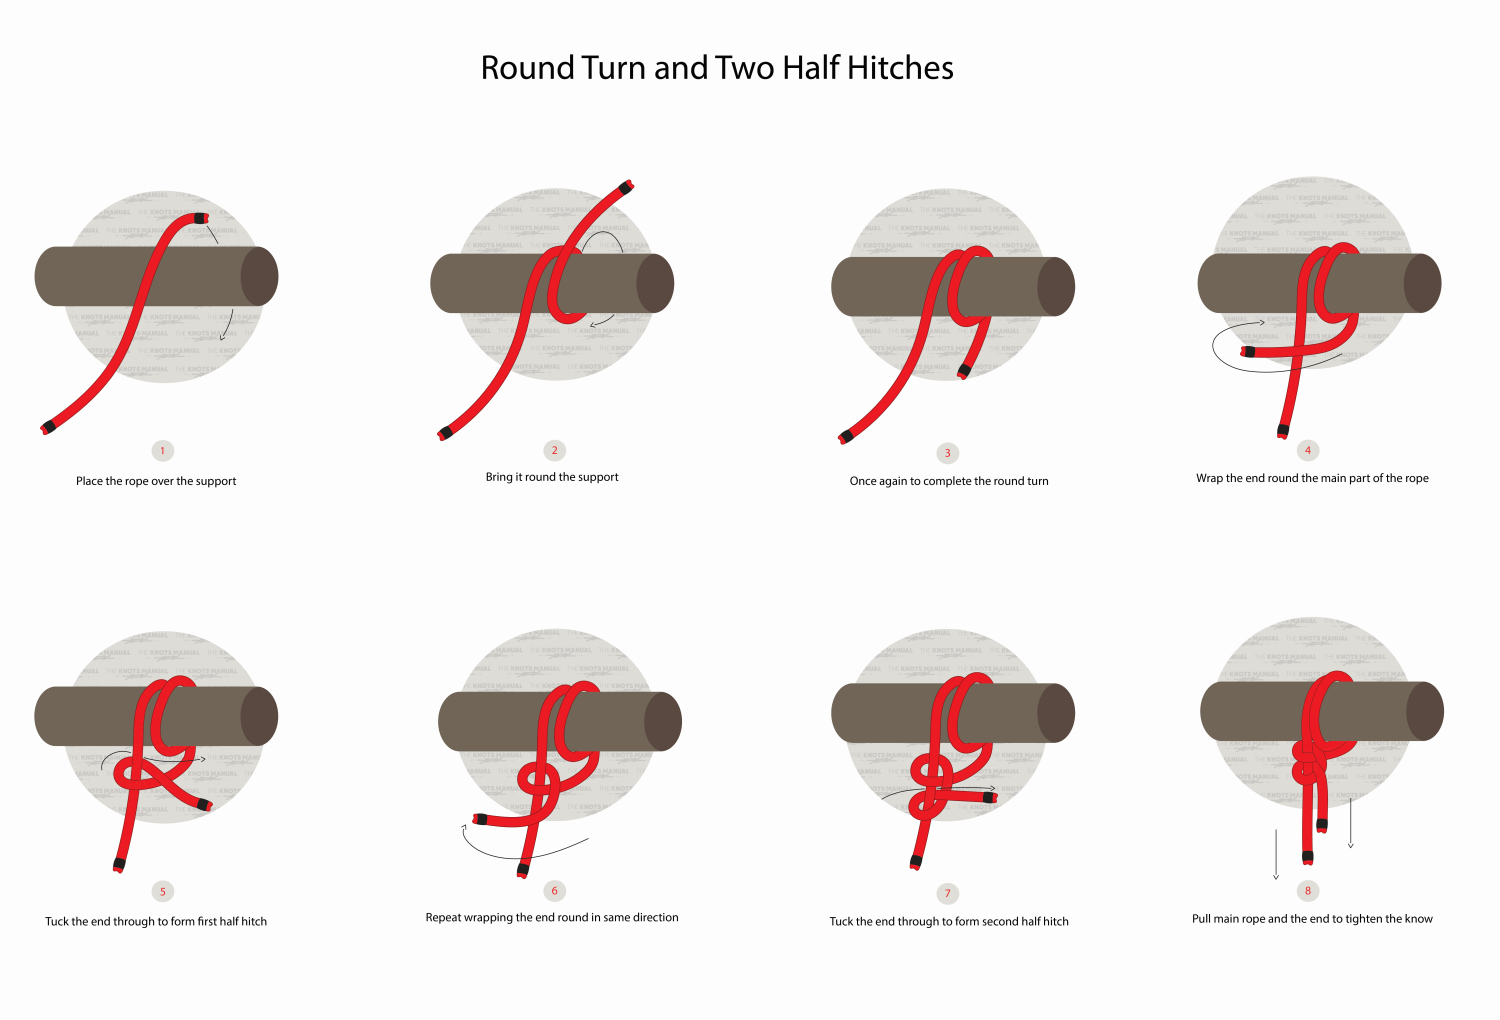 Round Turn & Two Half Hitches Step by step
